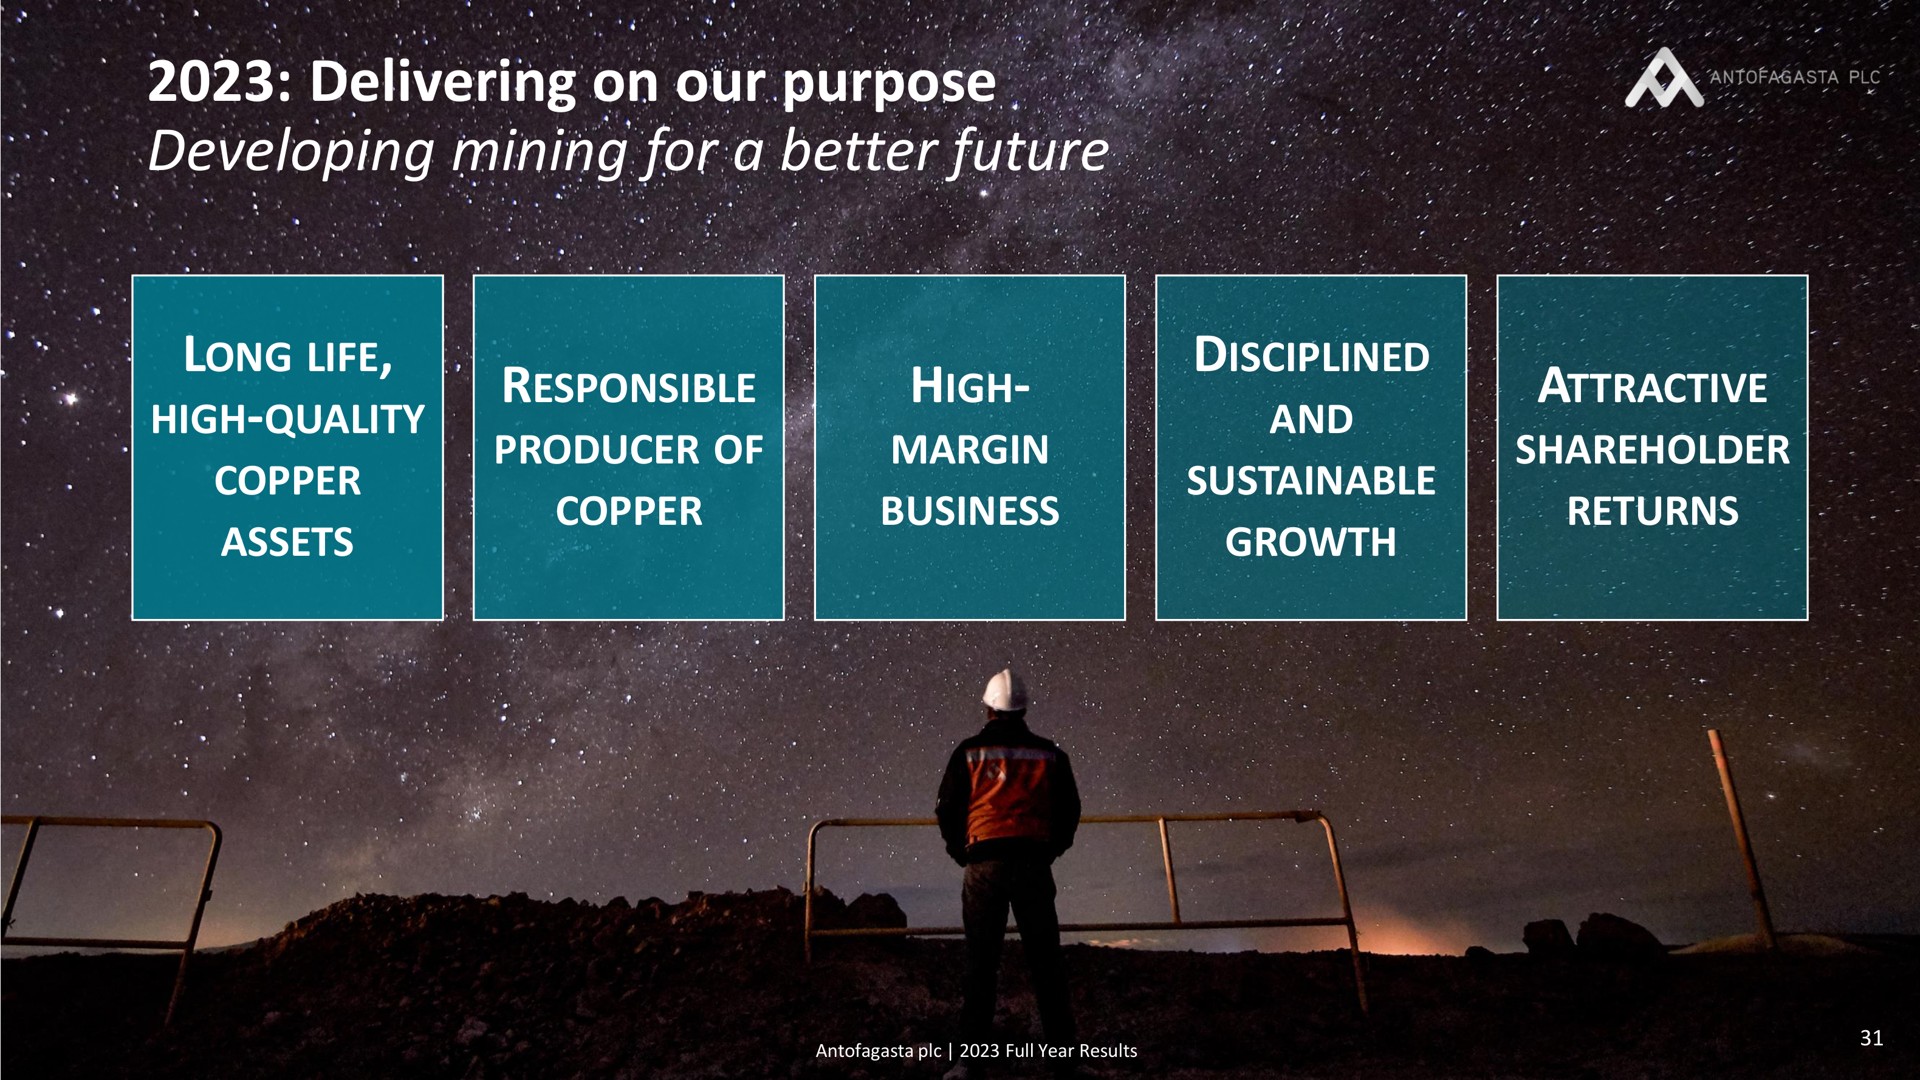 delivering on our purpose developing mining for a better future atta ase aes long life high quality responsible high by and ana attractive | Antofagasta